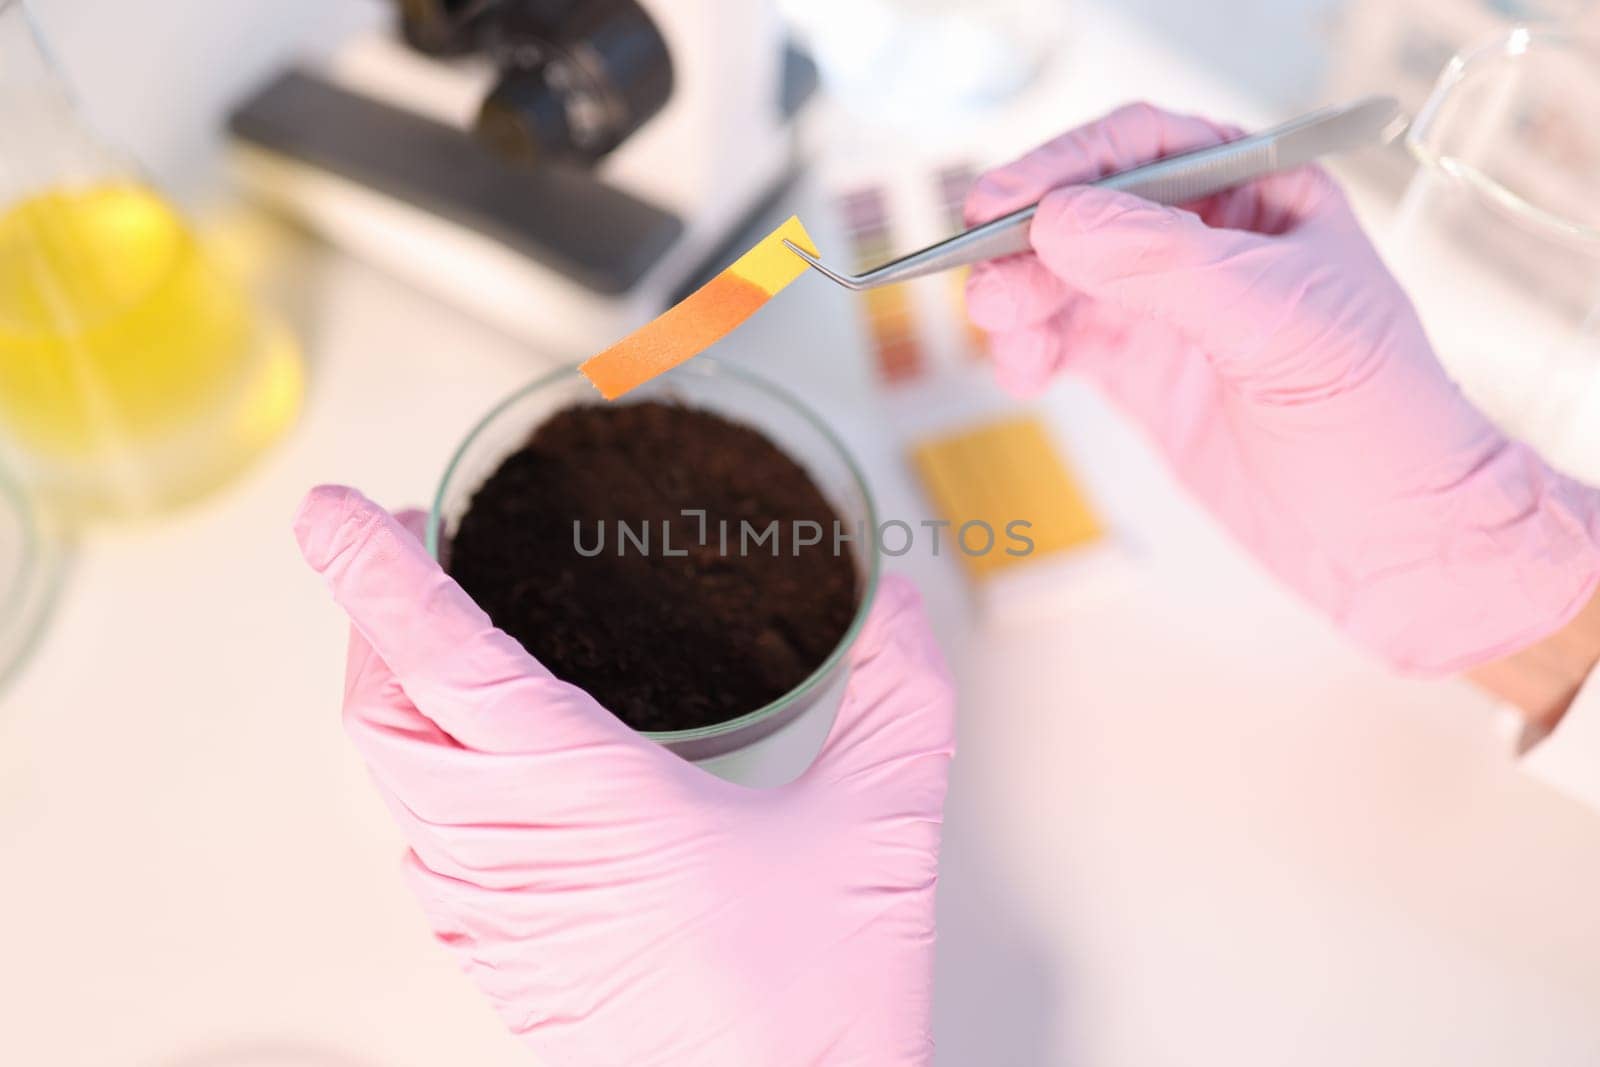 Laboratory analysis of soil contamination and test strip by kuprevich